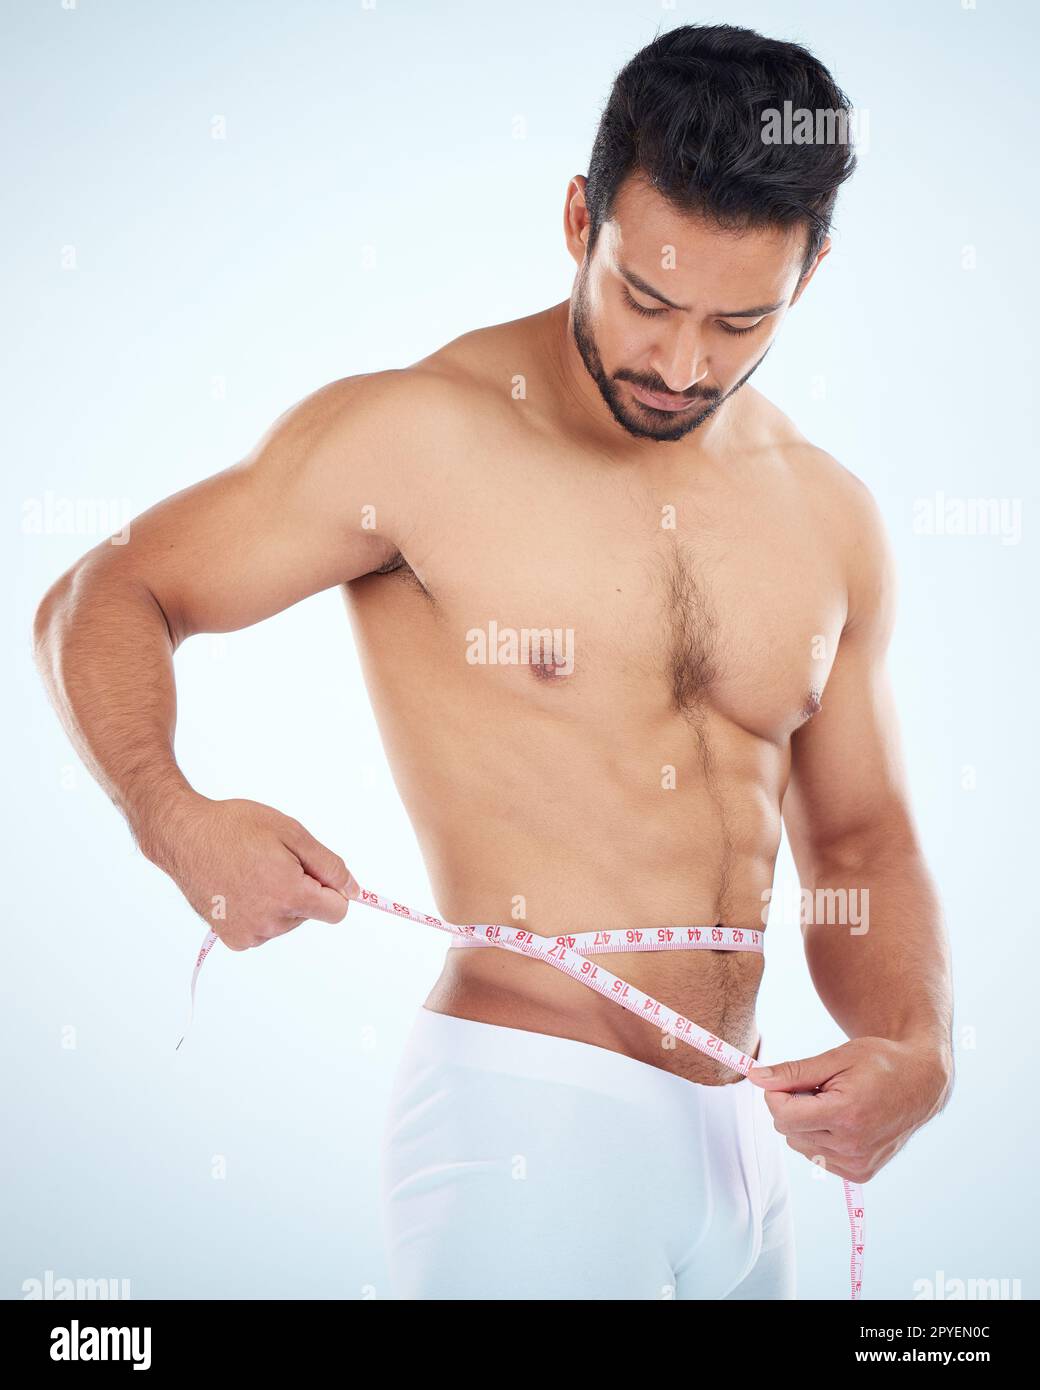 Man, body or measuring tape on waist on studio background for weight loss management, fat control or bmi healthcare wellness. Fitness model, sports athlete or coach with tape measure for muscle goals Stock Photo